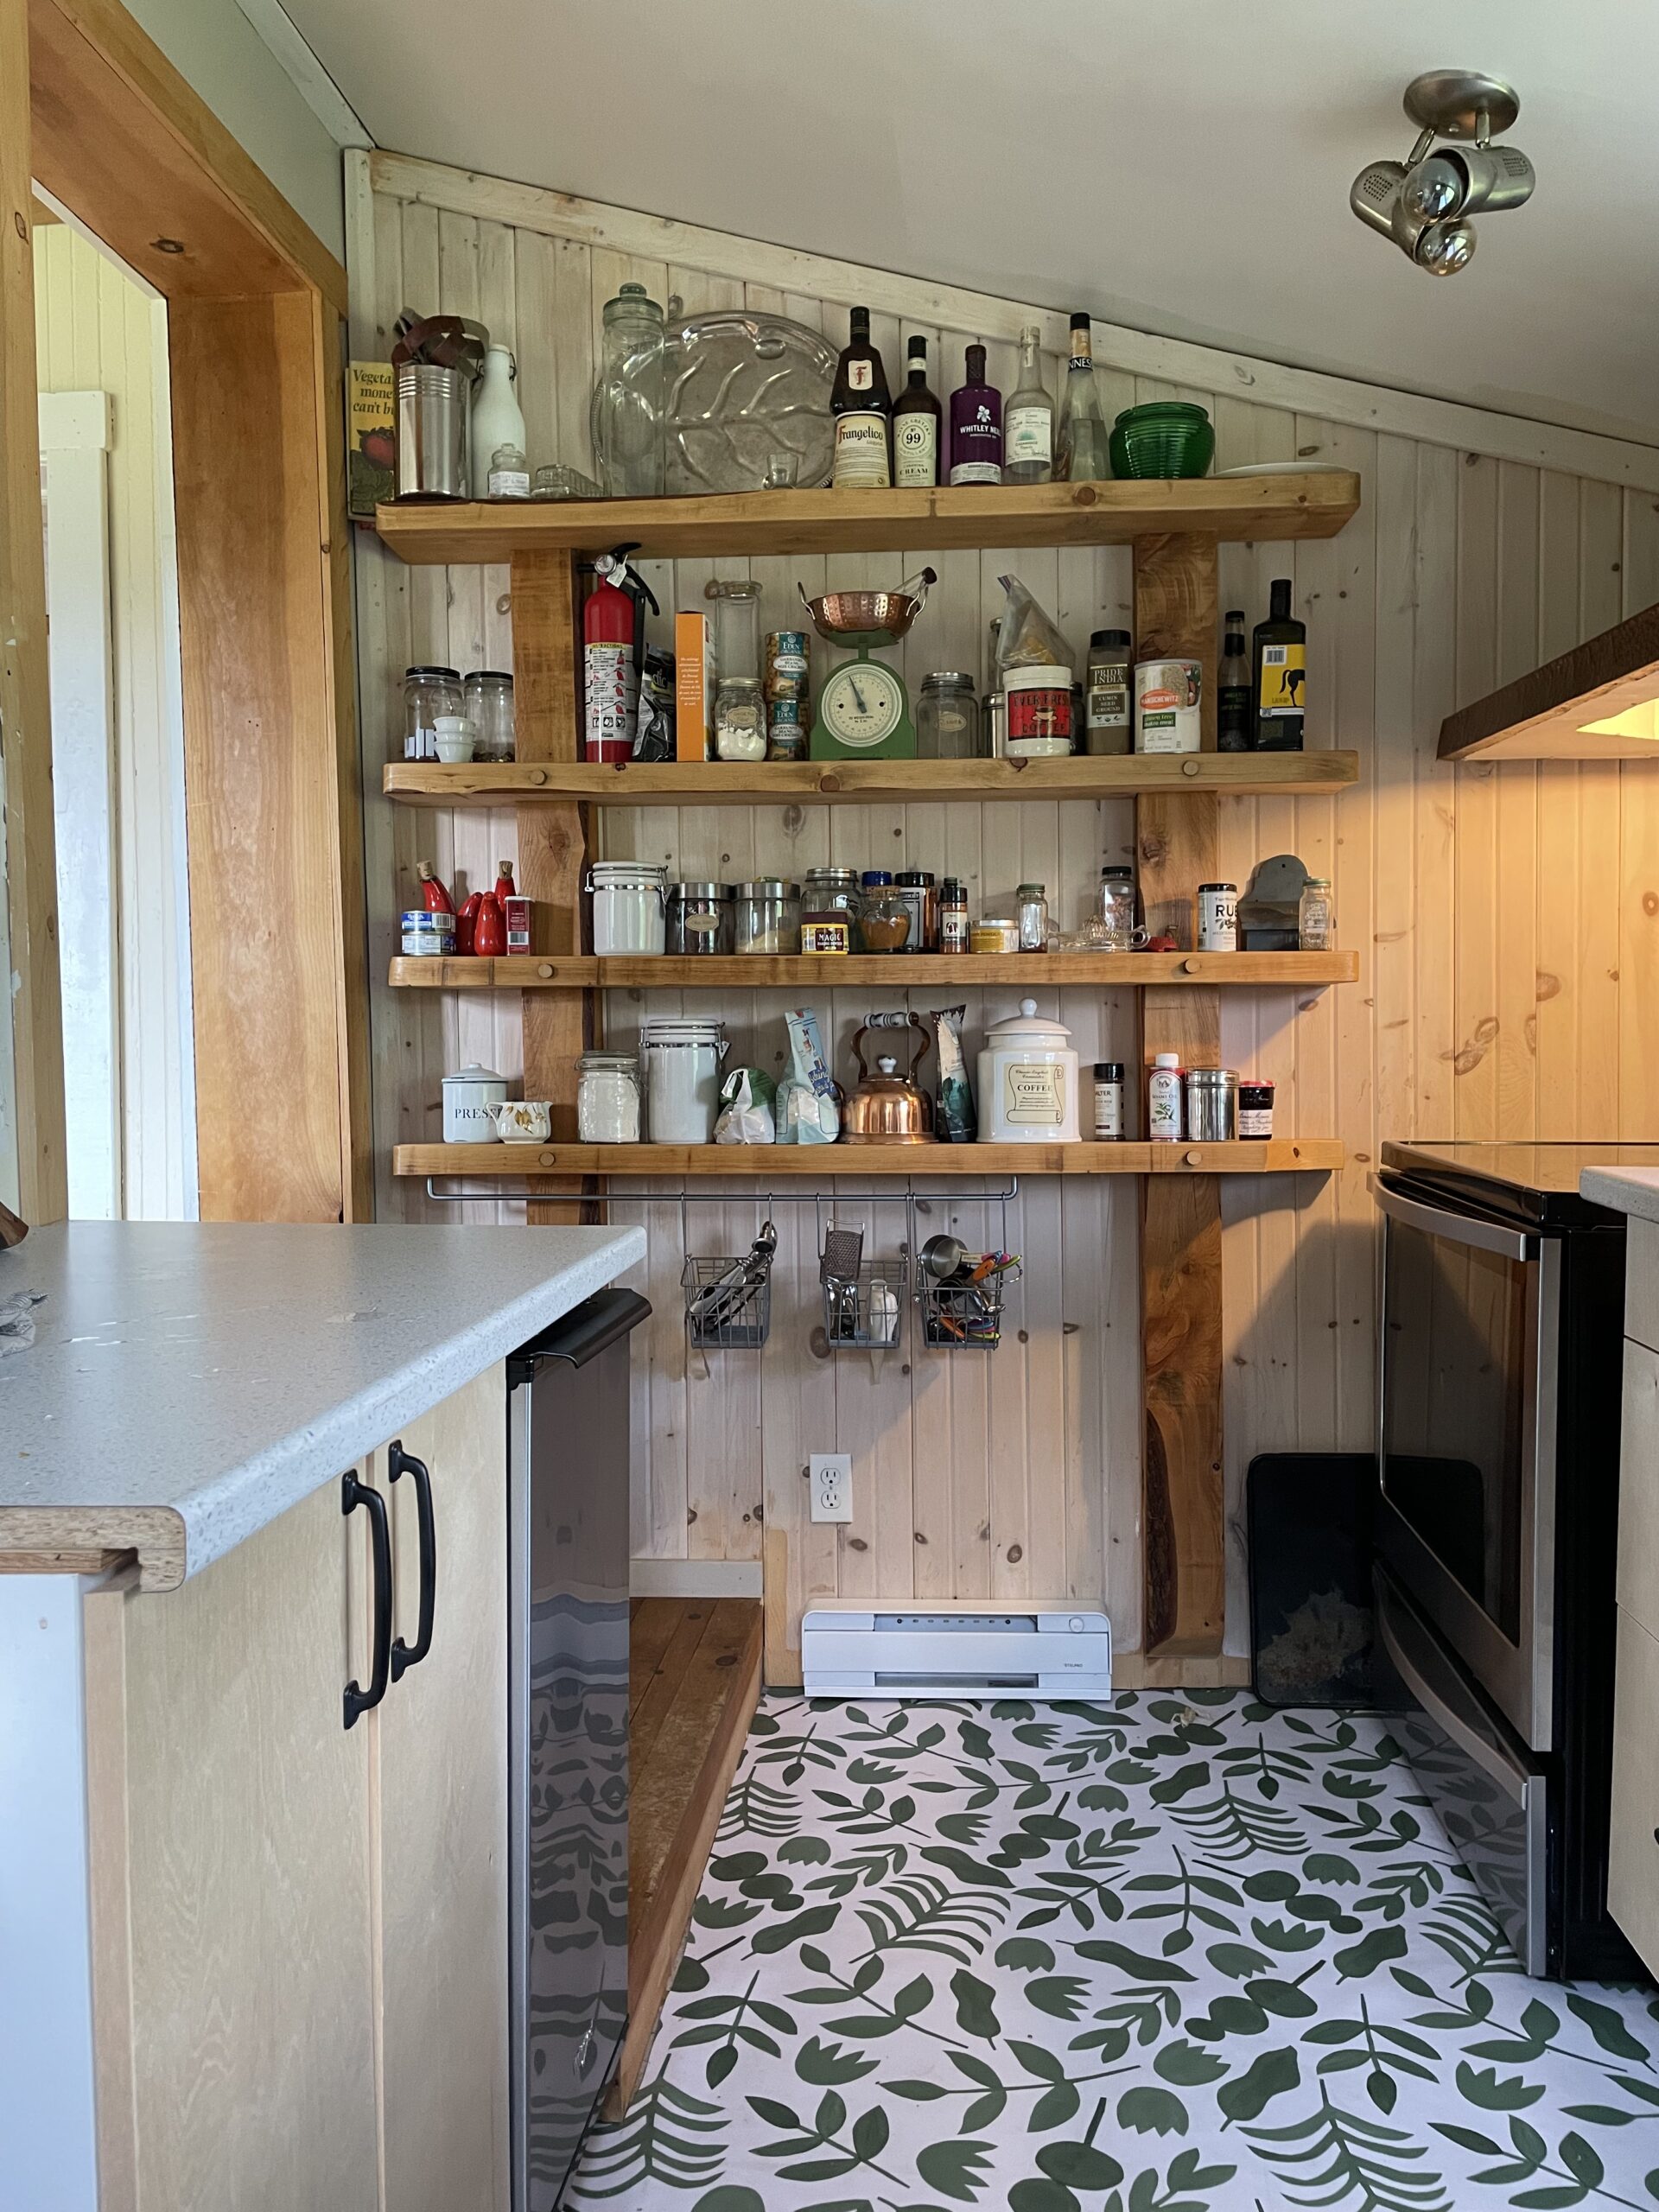 a kitchen with a patterned floor and shelving